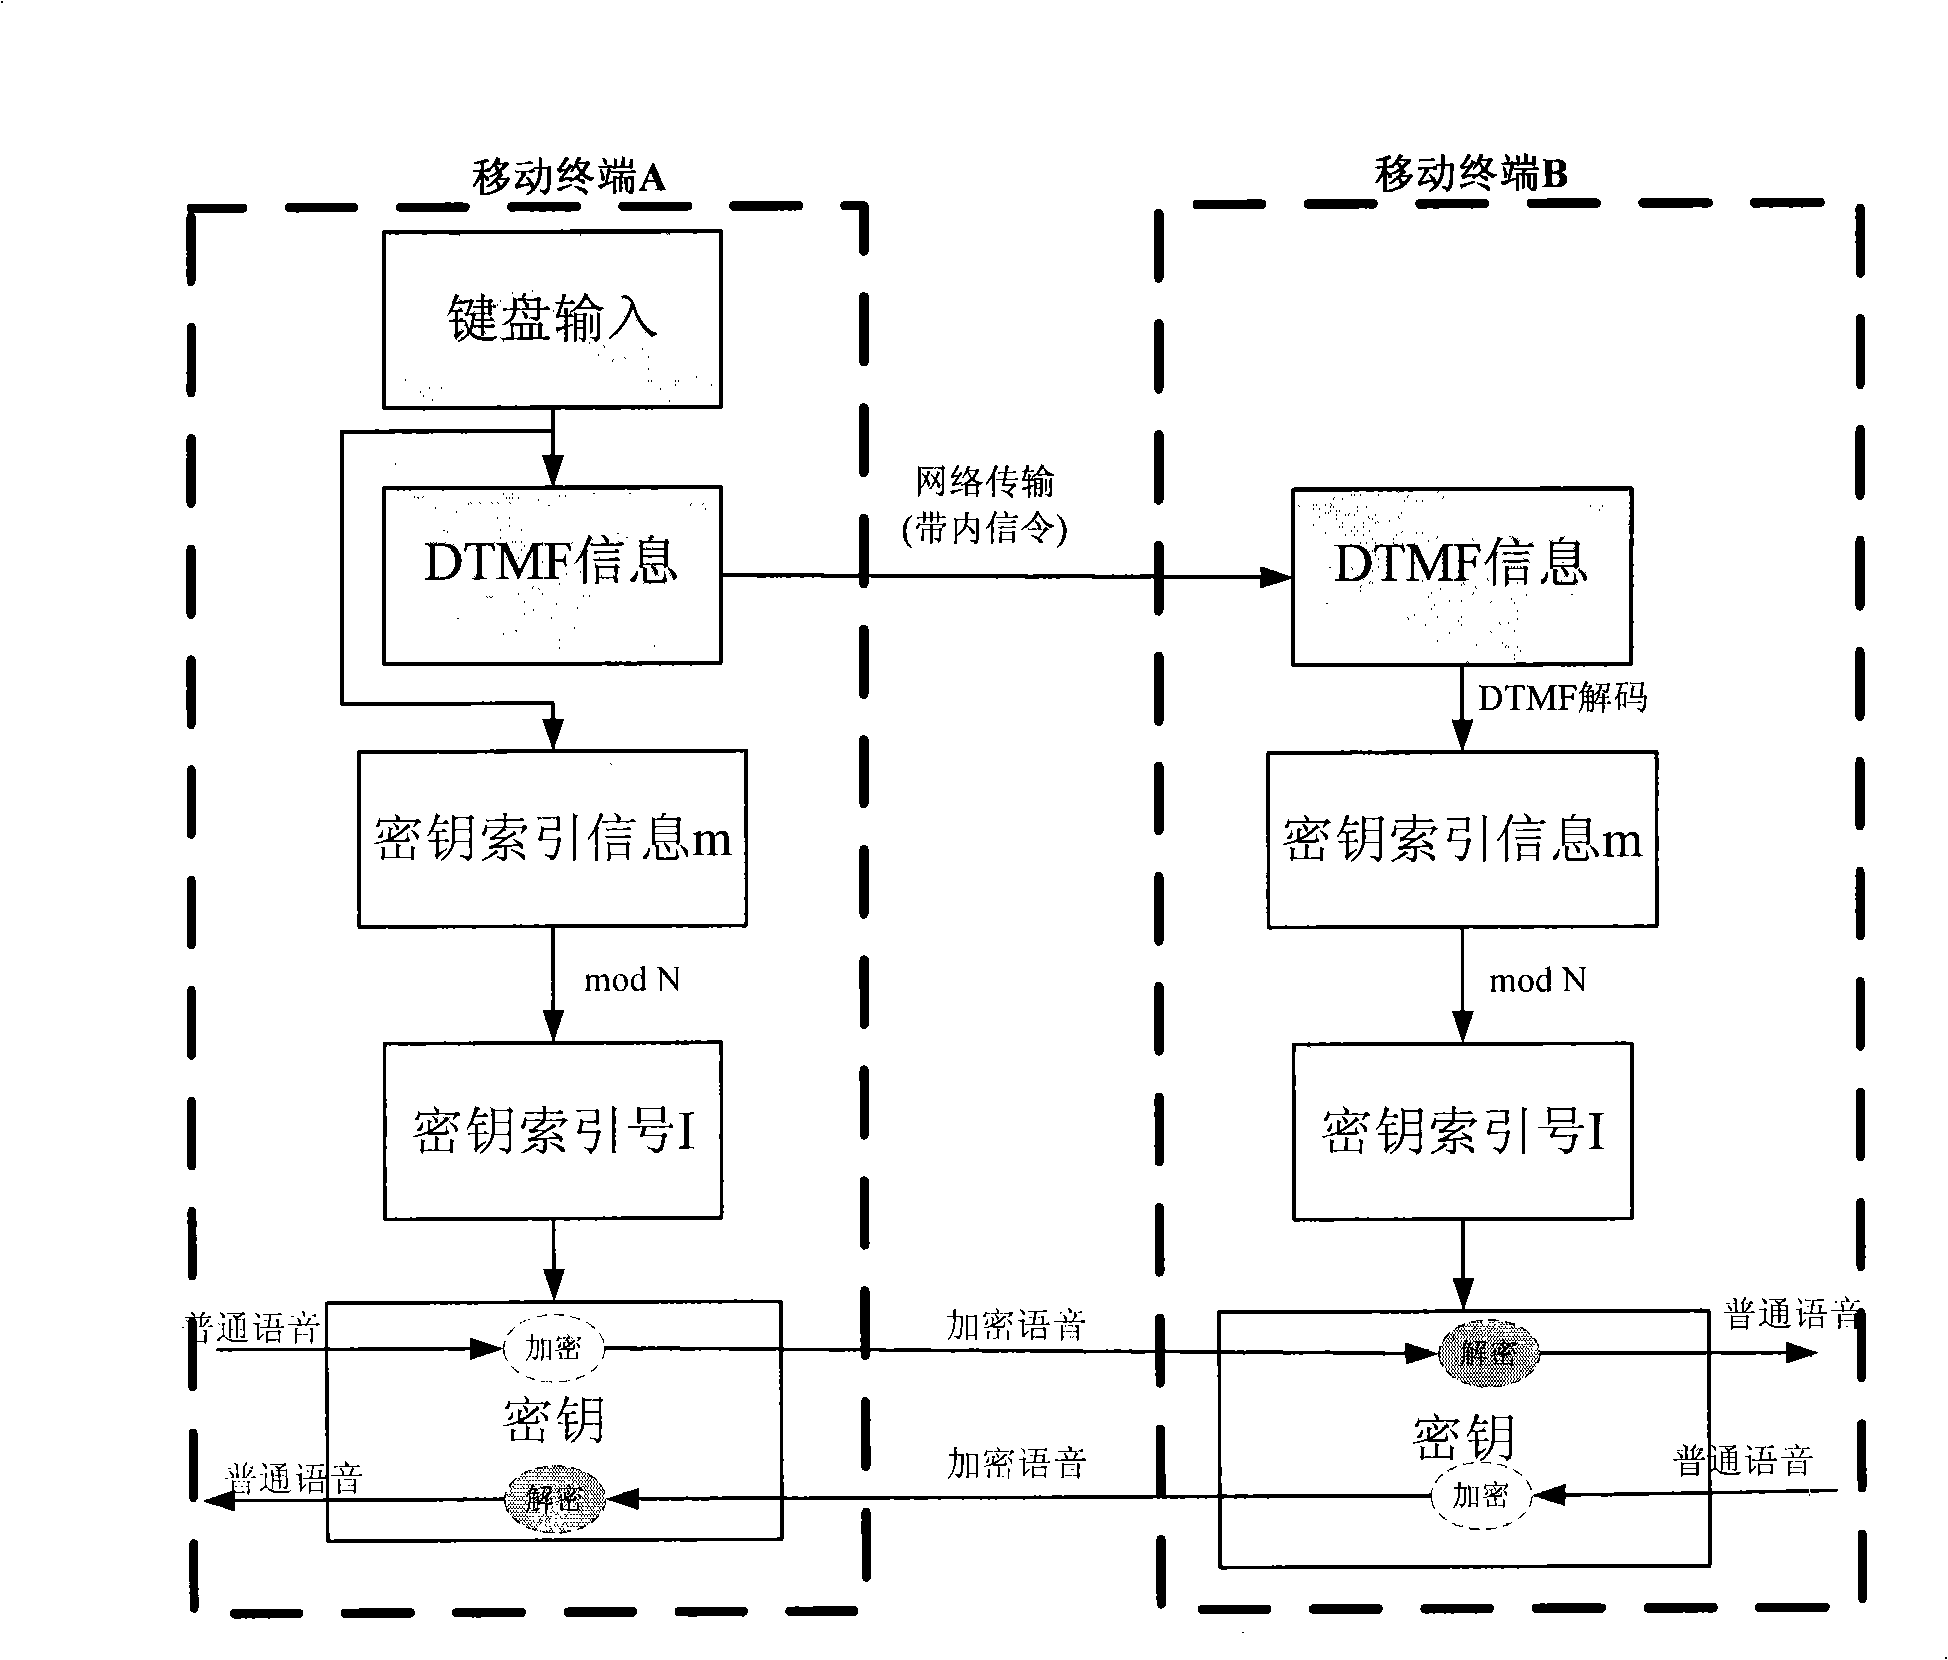 Method and device for end-to-end ciphering voice